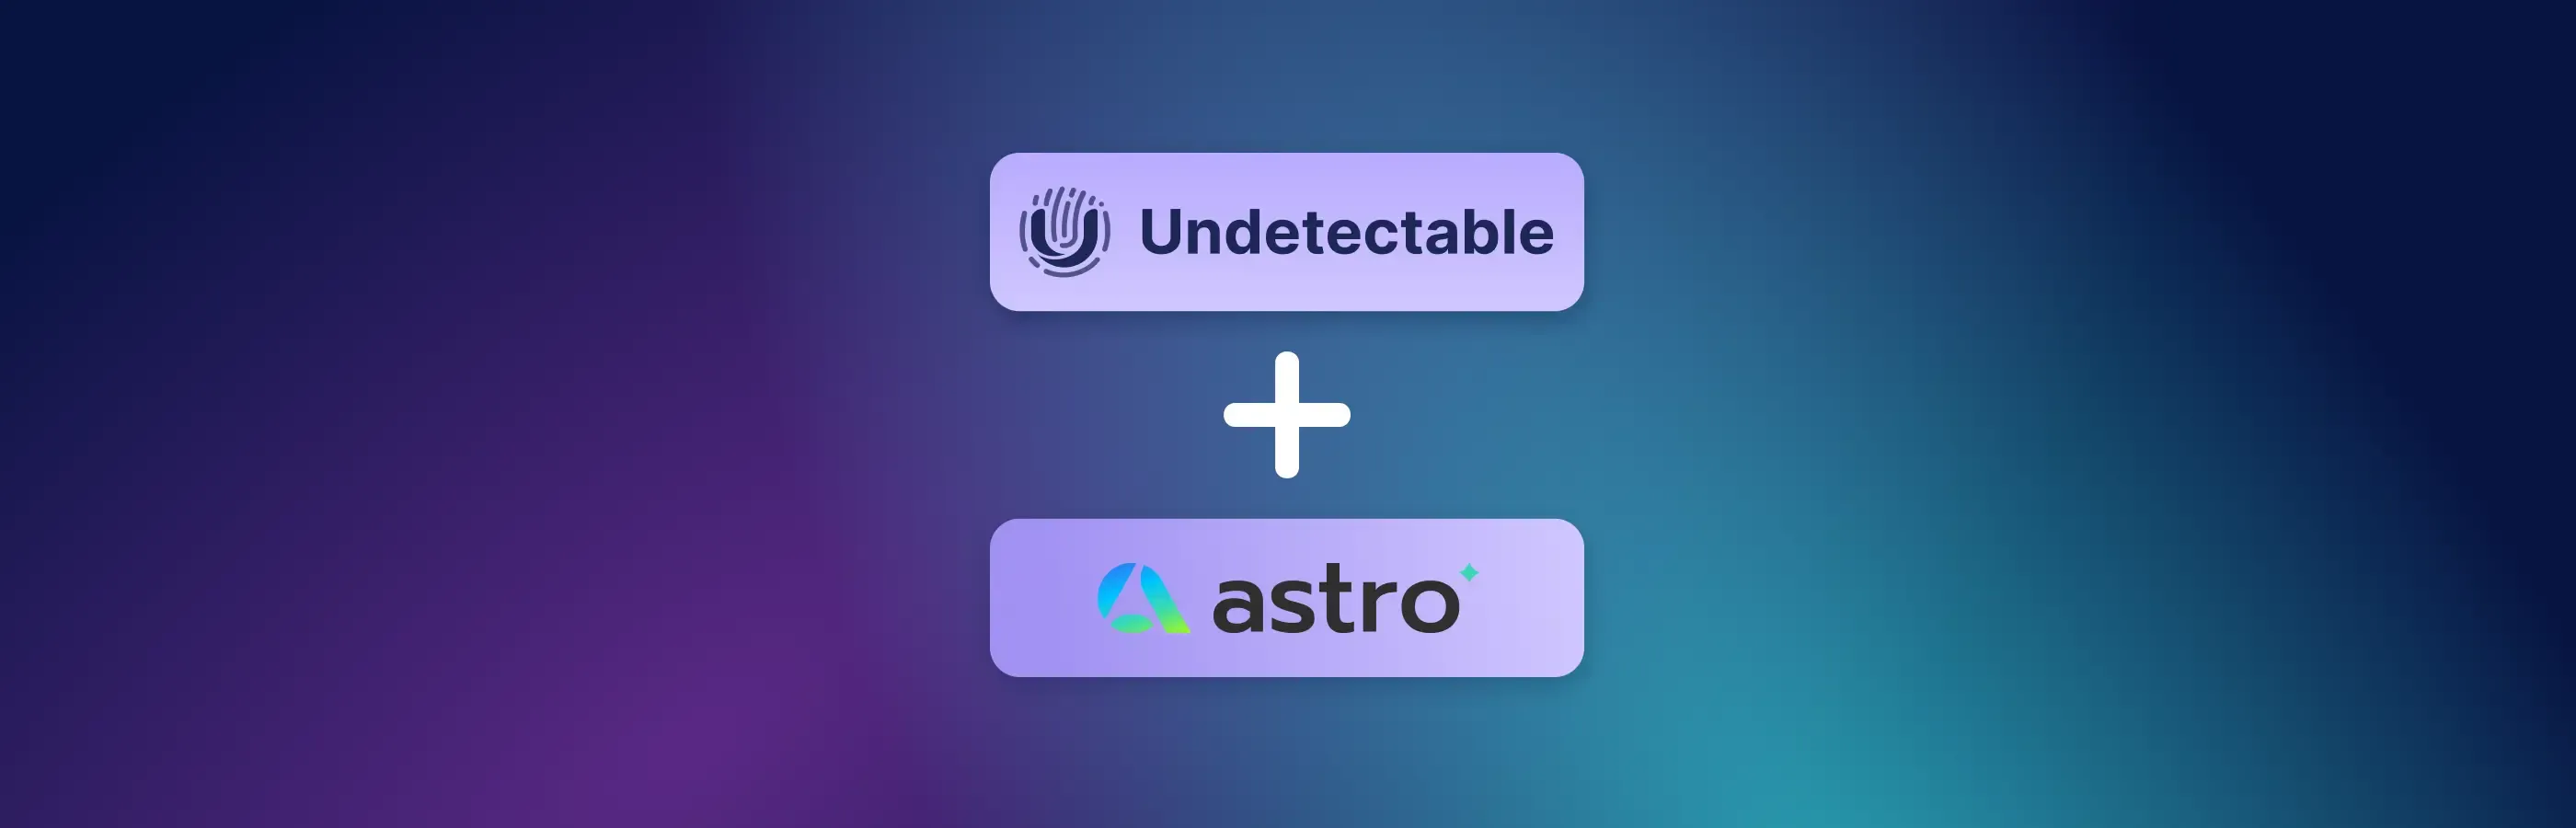 AstroをUndetectableと使用する方法